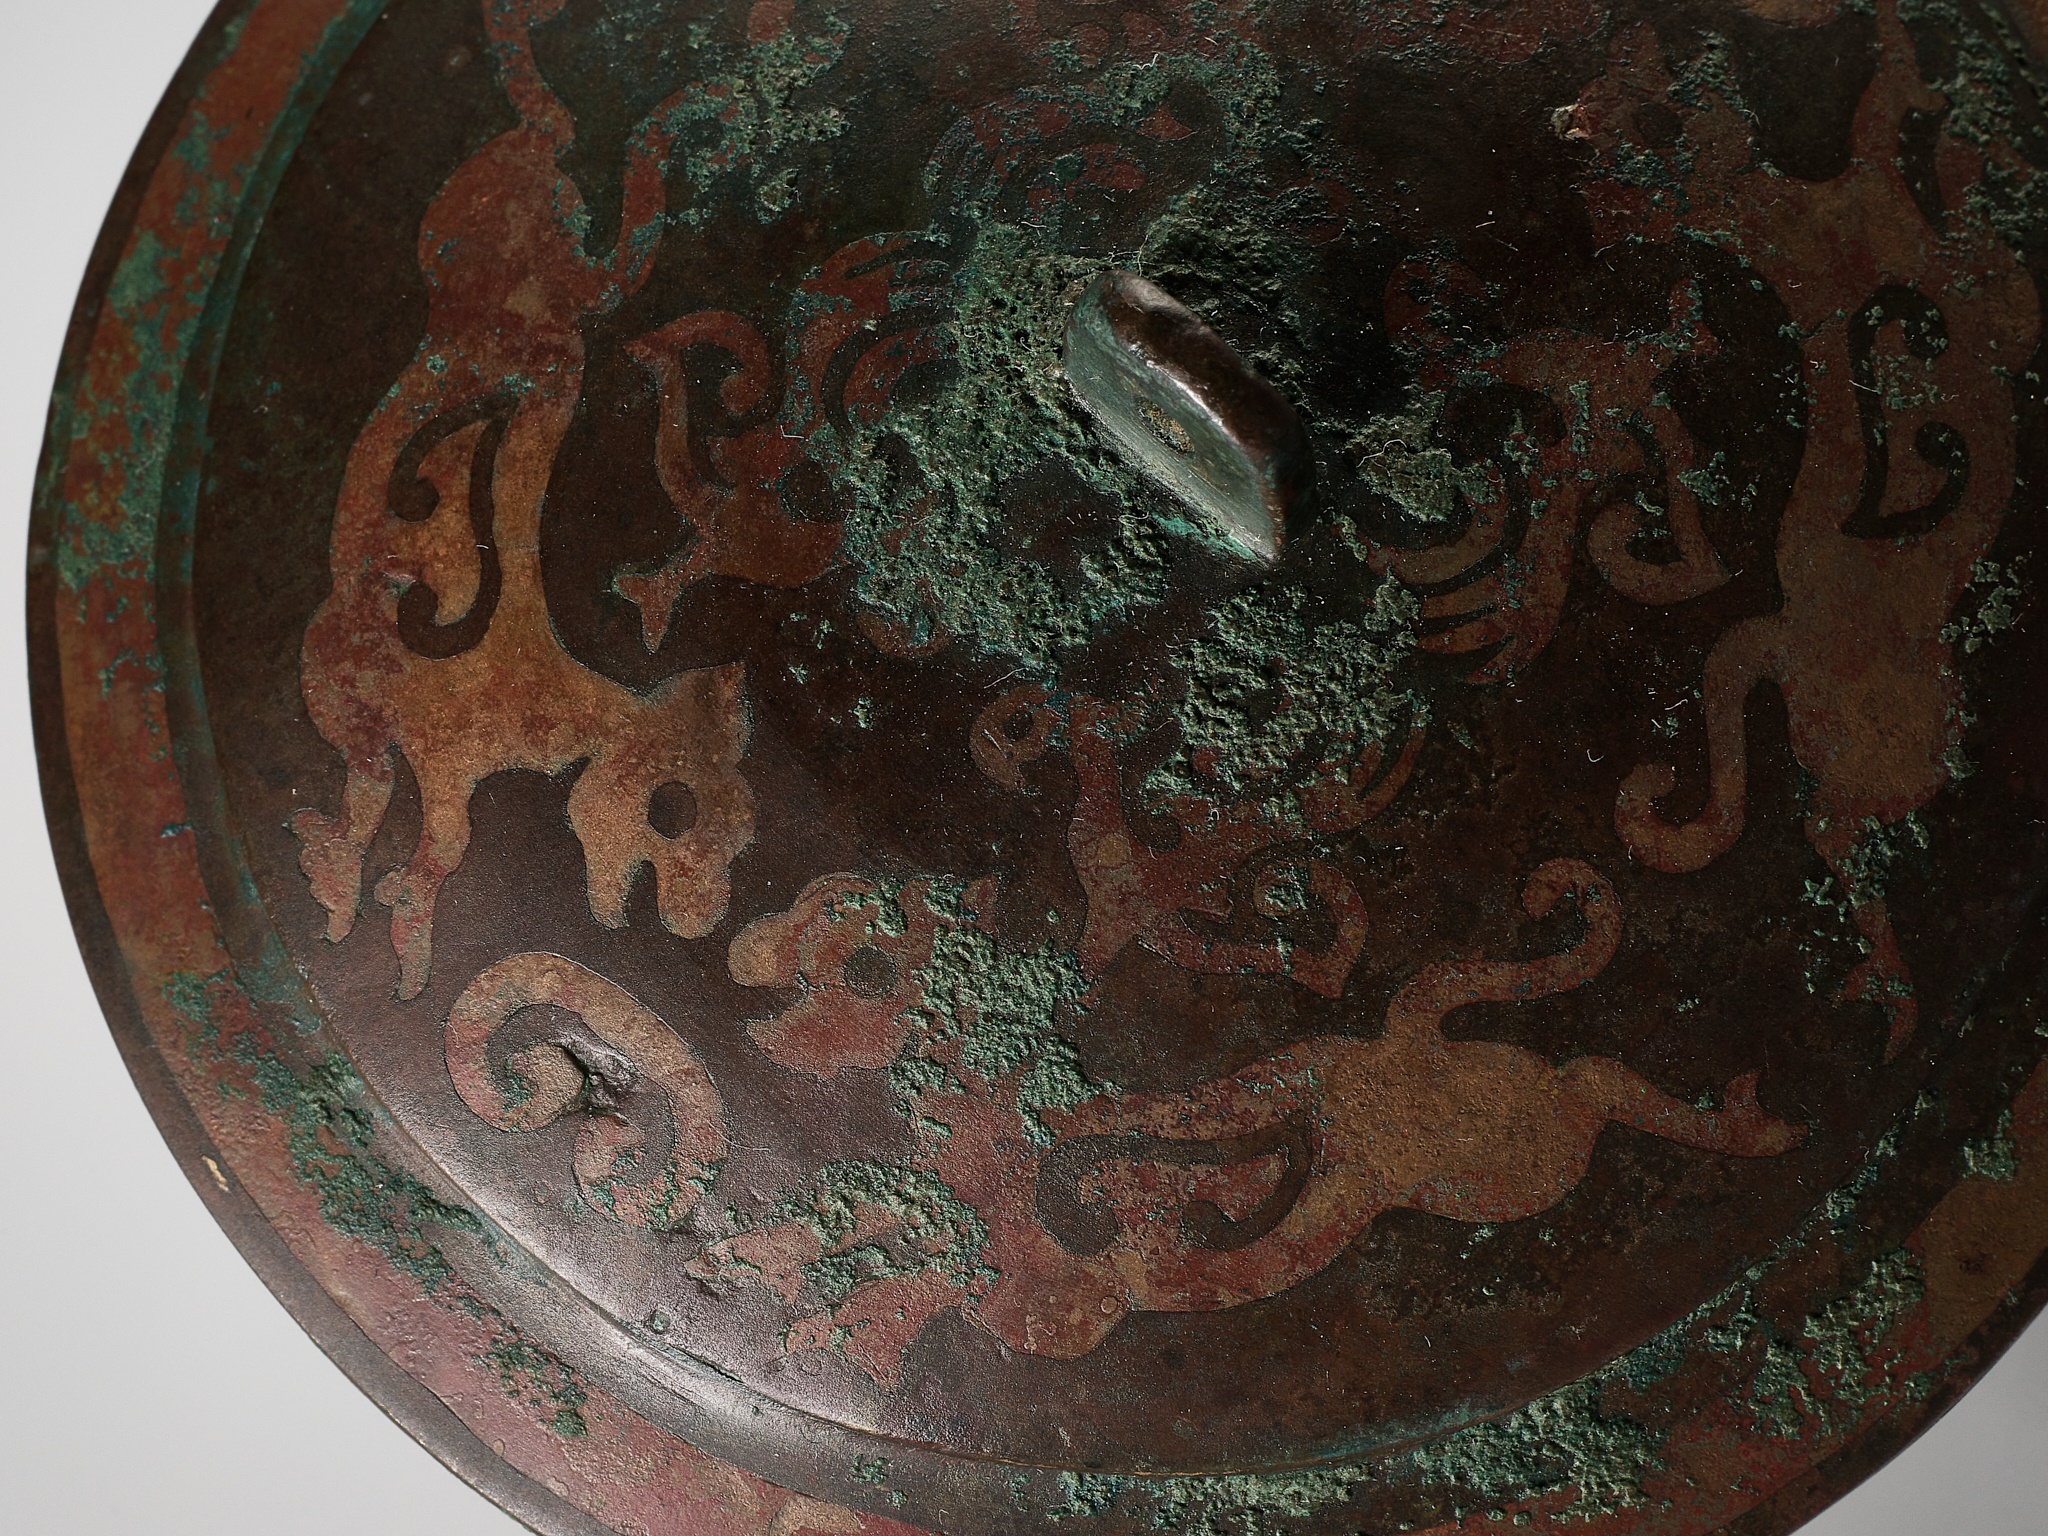 A COPPER-INLAID BRONZE RITUAL WINE VESSEL AND COVER, HU, EASTERN ZHOU DYNASTY - Image 7 of 27